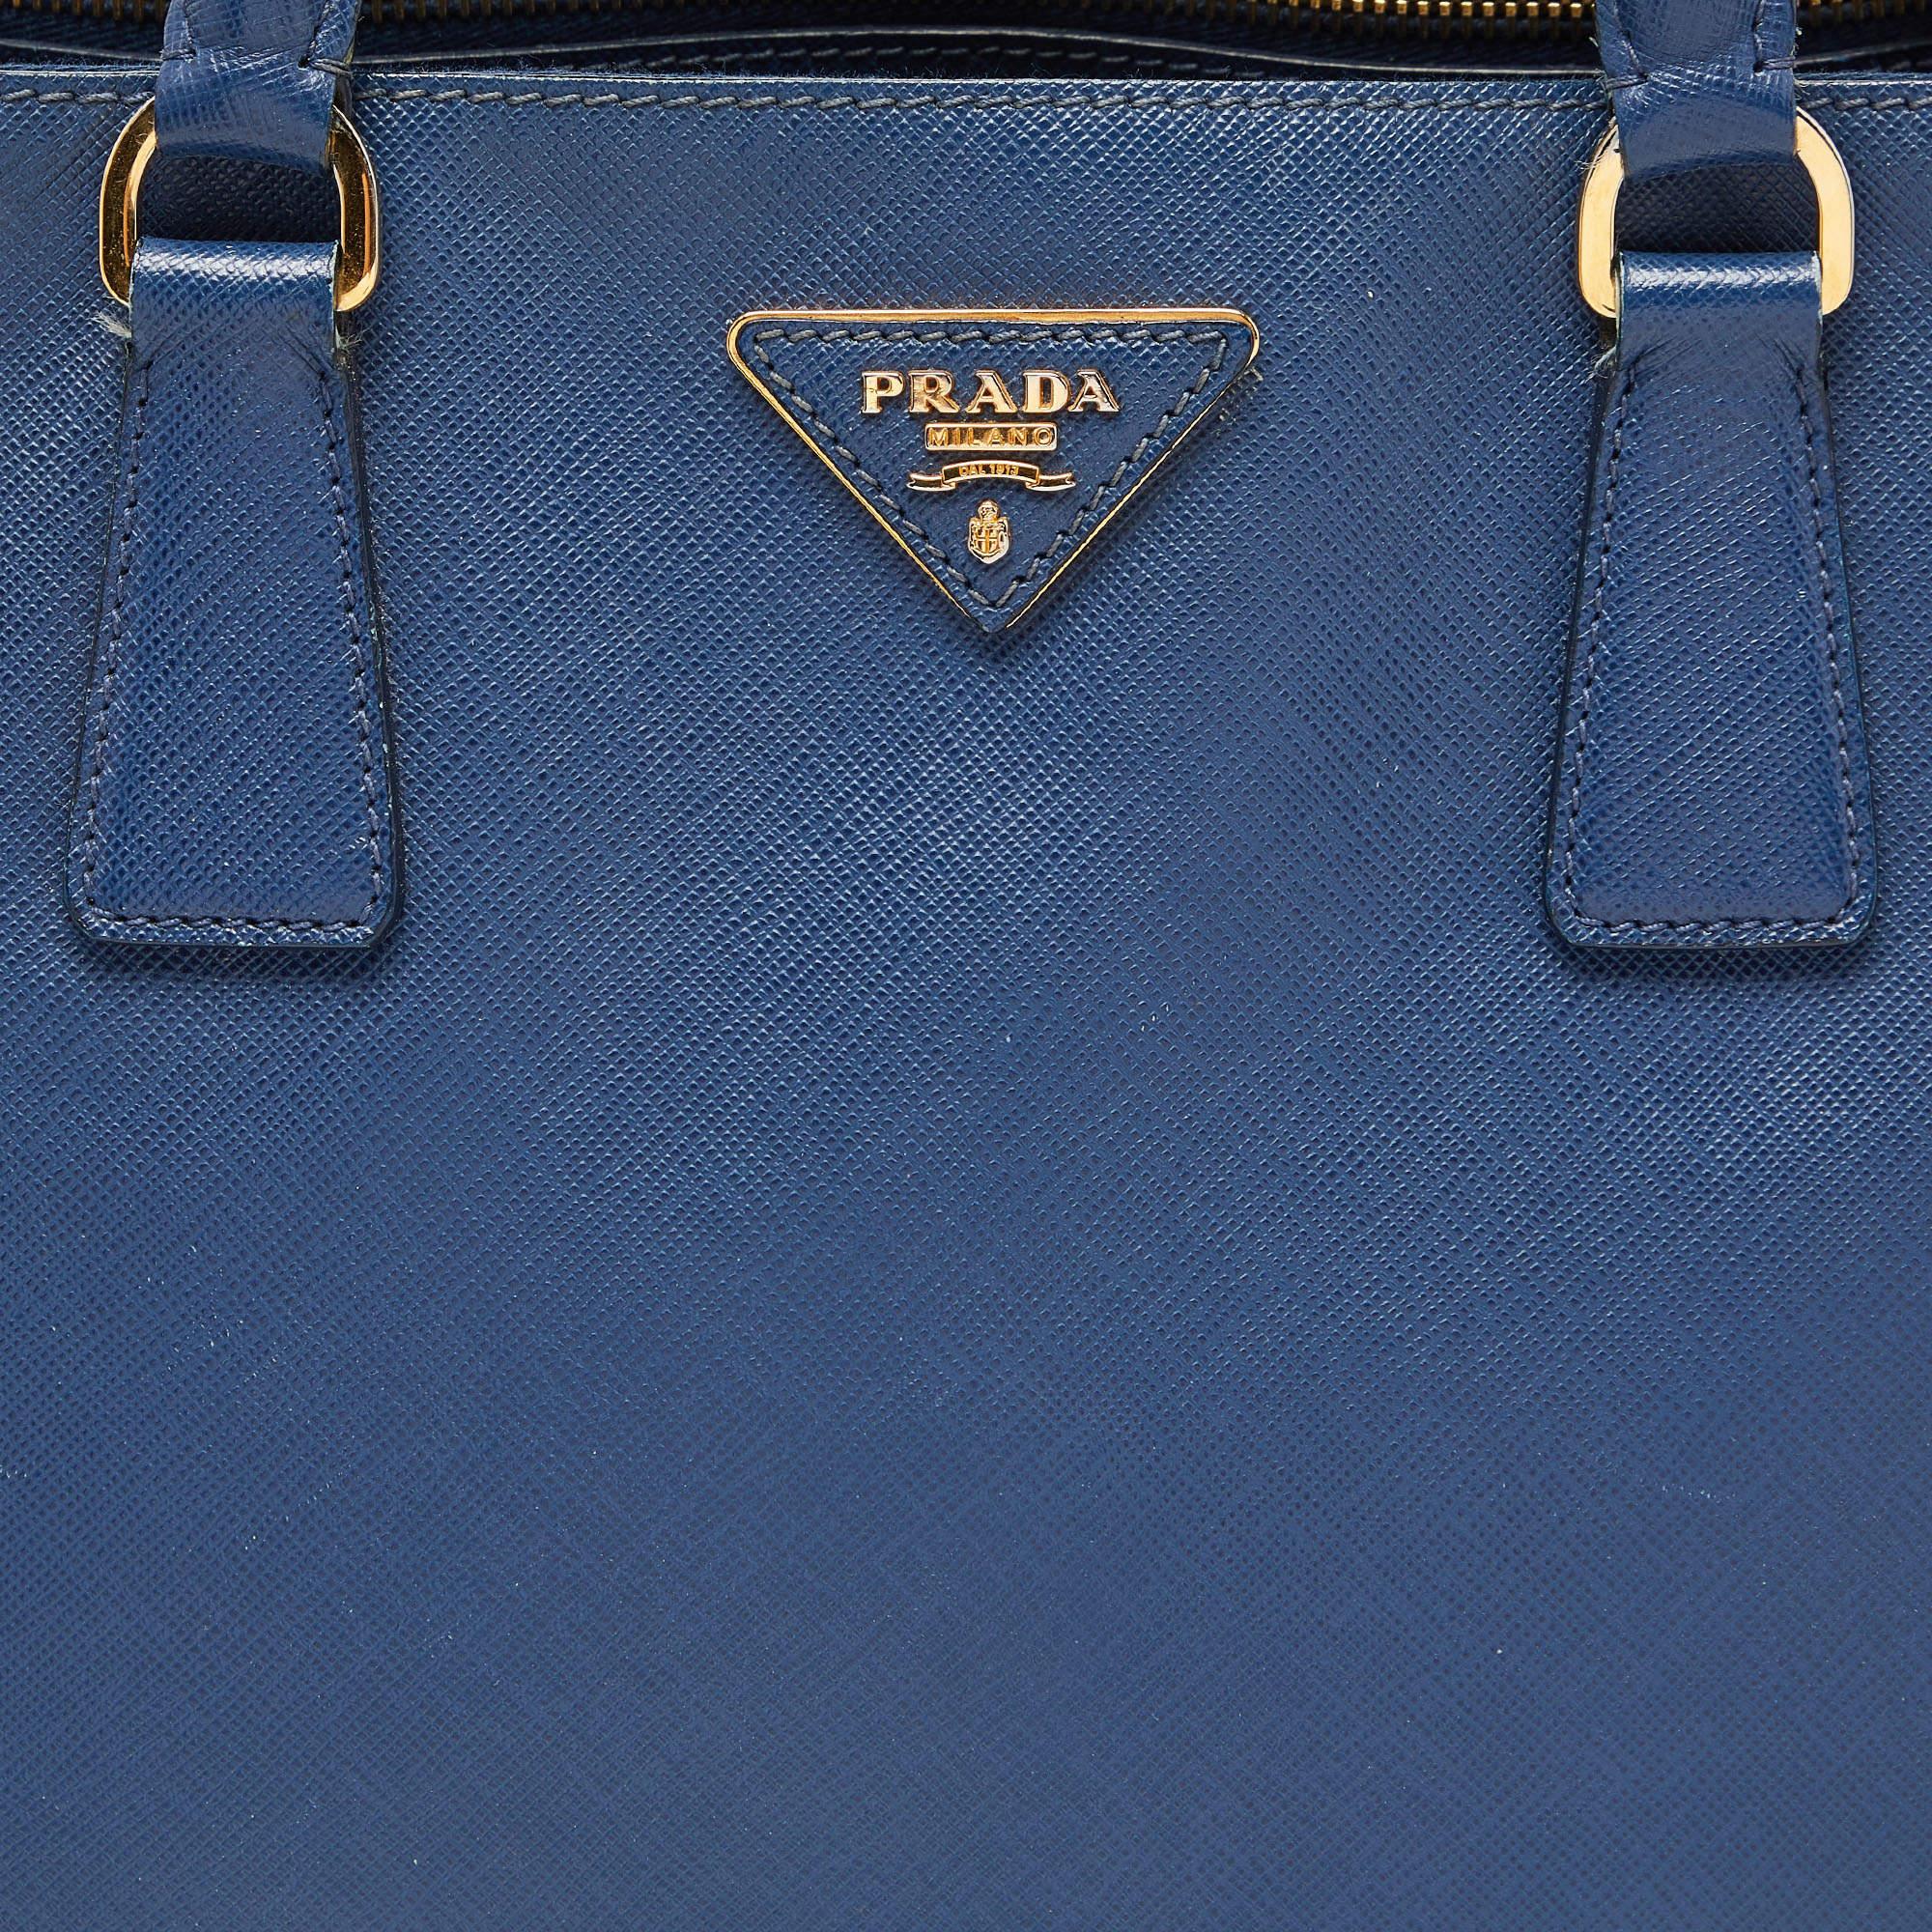 Prada Blue Saffiano Lux Leather Large Galleria Double Zip Tote For Sale 4